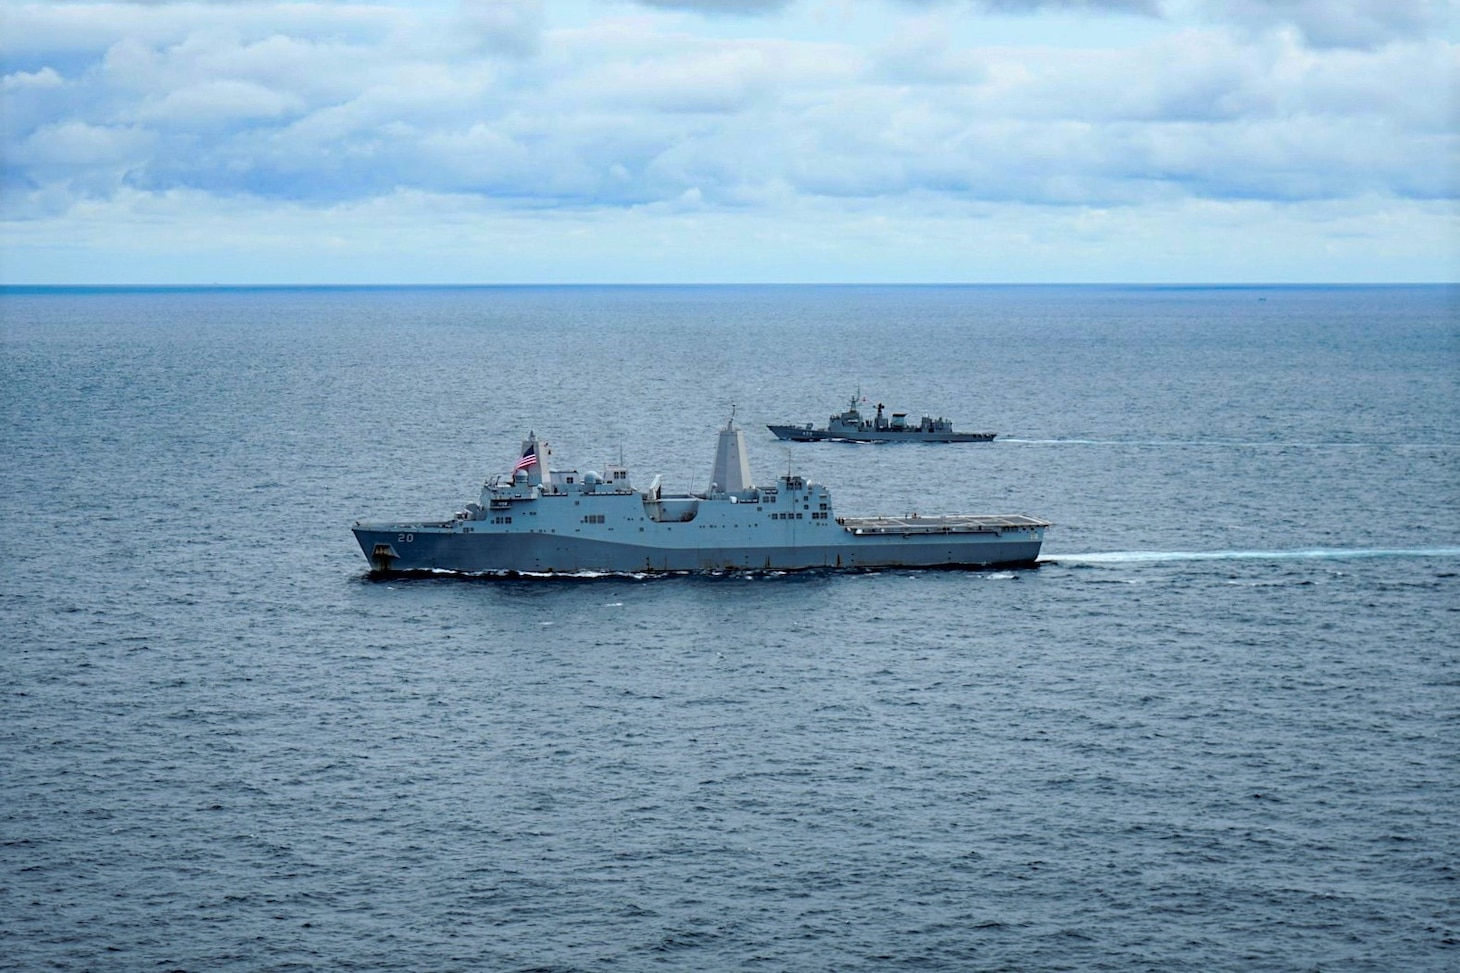 GULF OF THAILAND (Sept. 8, 2021) USS Green Bay (LPD 20) sails in company with Royal Navy Thai frigates during Cooperation Afloat Readiness and Training (CARAT) exercise. In its 27th year, the CARAT series is comprised of multinational exercises designed to enhance U.S. and partner navies' abilities to operate together in response to traditional and non-traditional maritime security challenges in the Indo-Pacific region. (Courtesy photo by Royal Thai Navy)